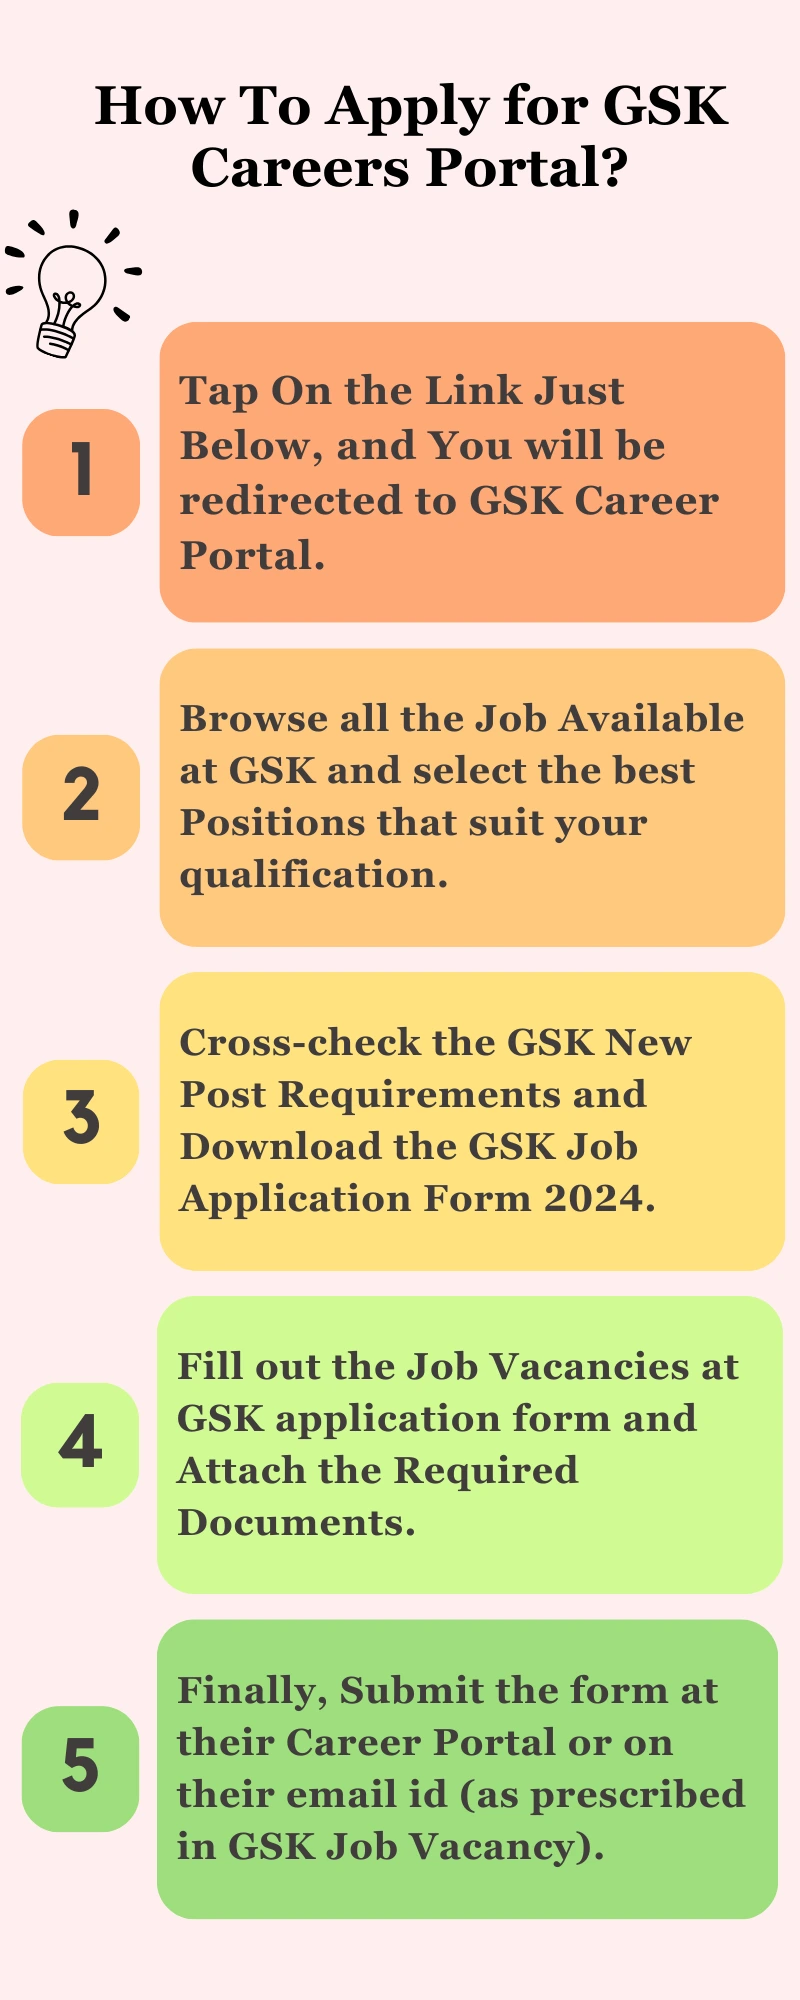 How To Apply for GSK Careers Portal?